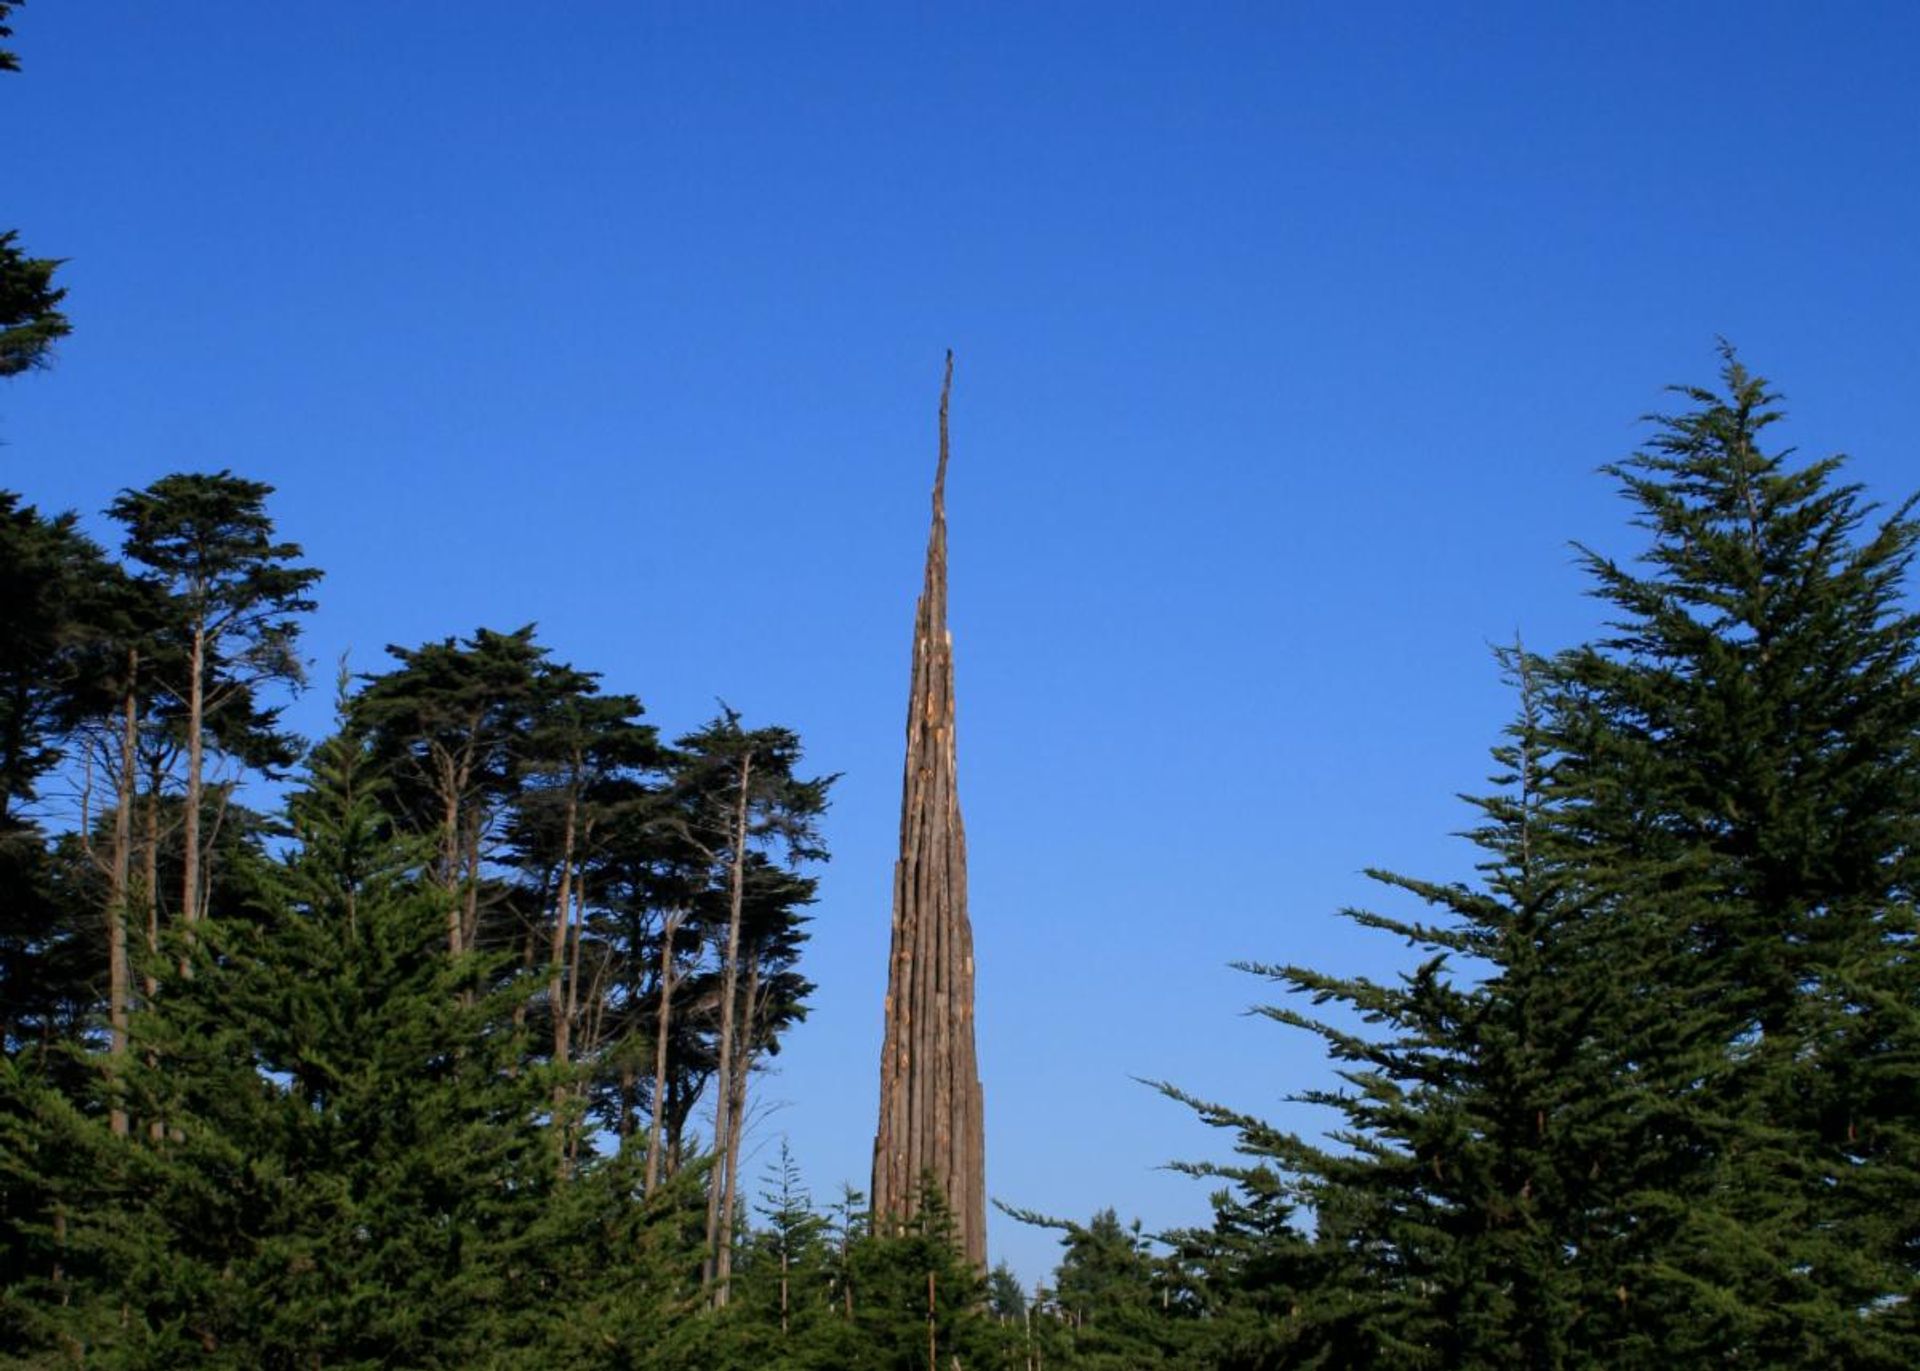 Spire (2008) by Andy Goldsworthy in San Francisco's Presidio national park © Andy Goldsworthy